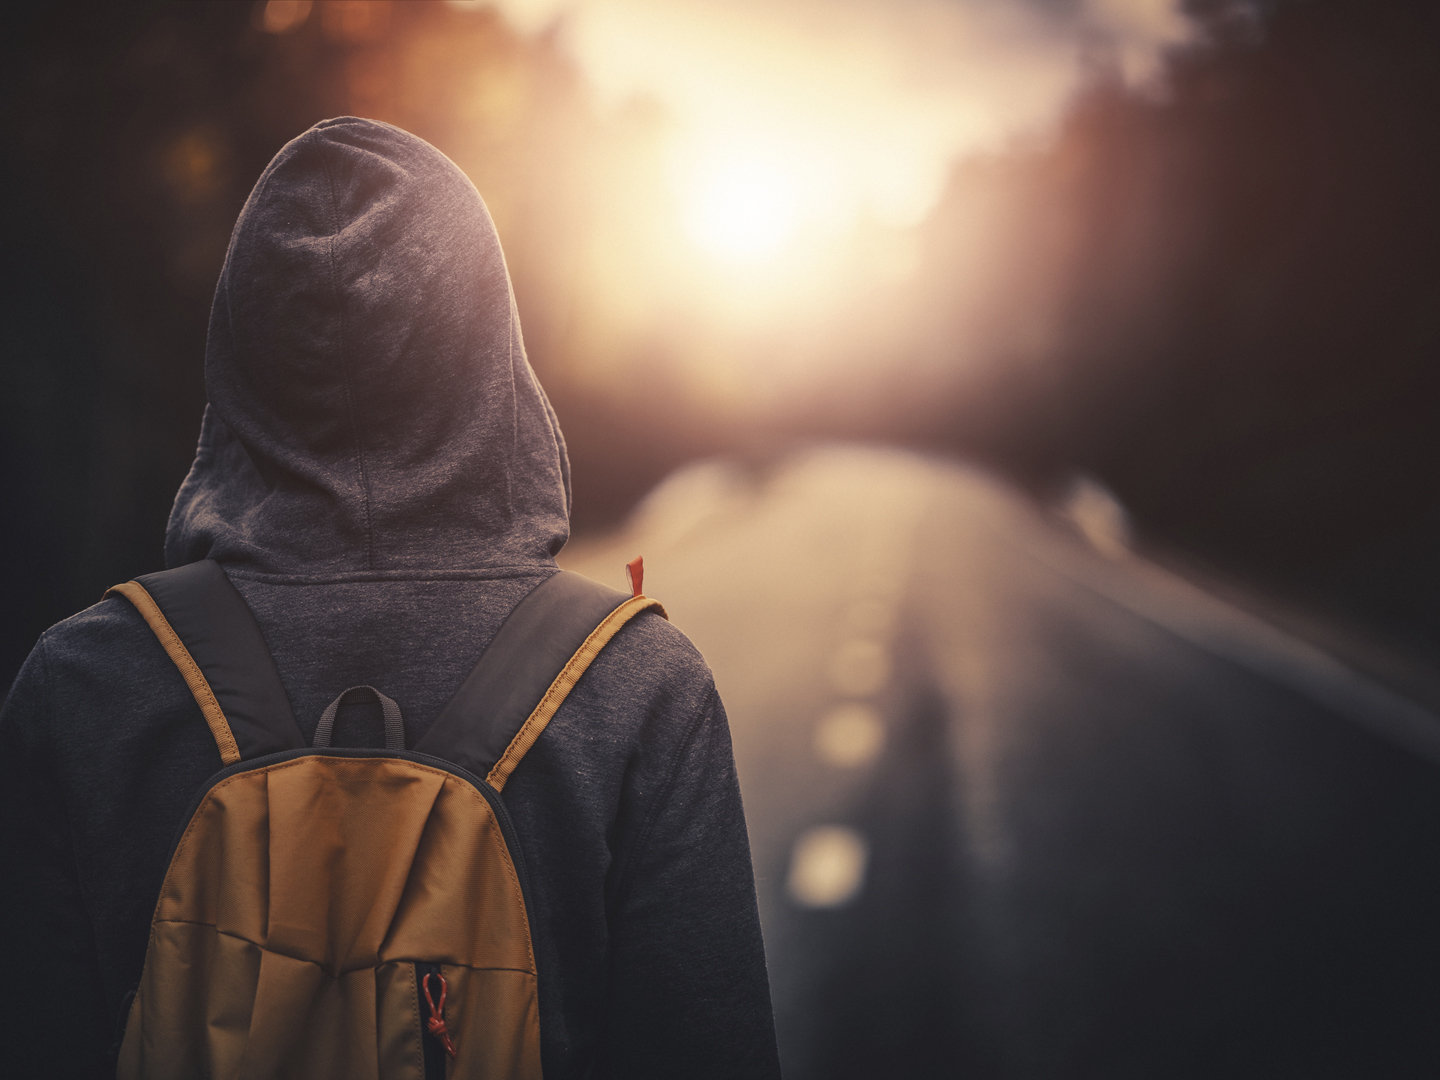 Traveler with backpack walking forward alone at sunset. Stock photo.